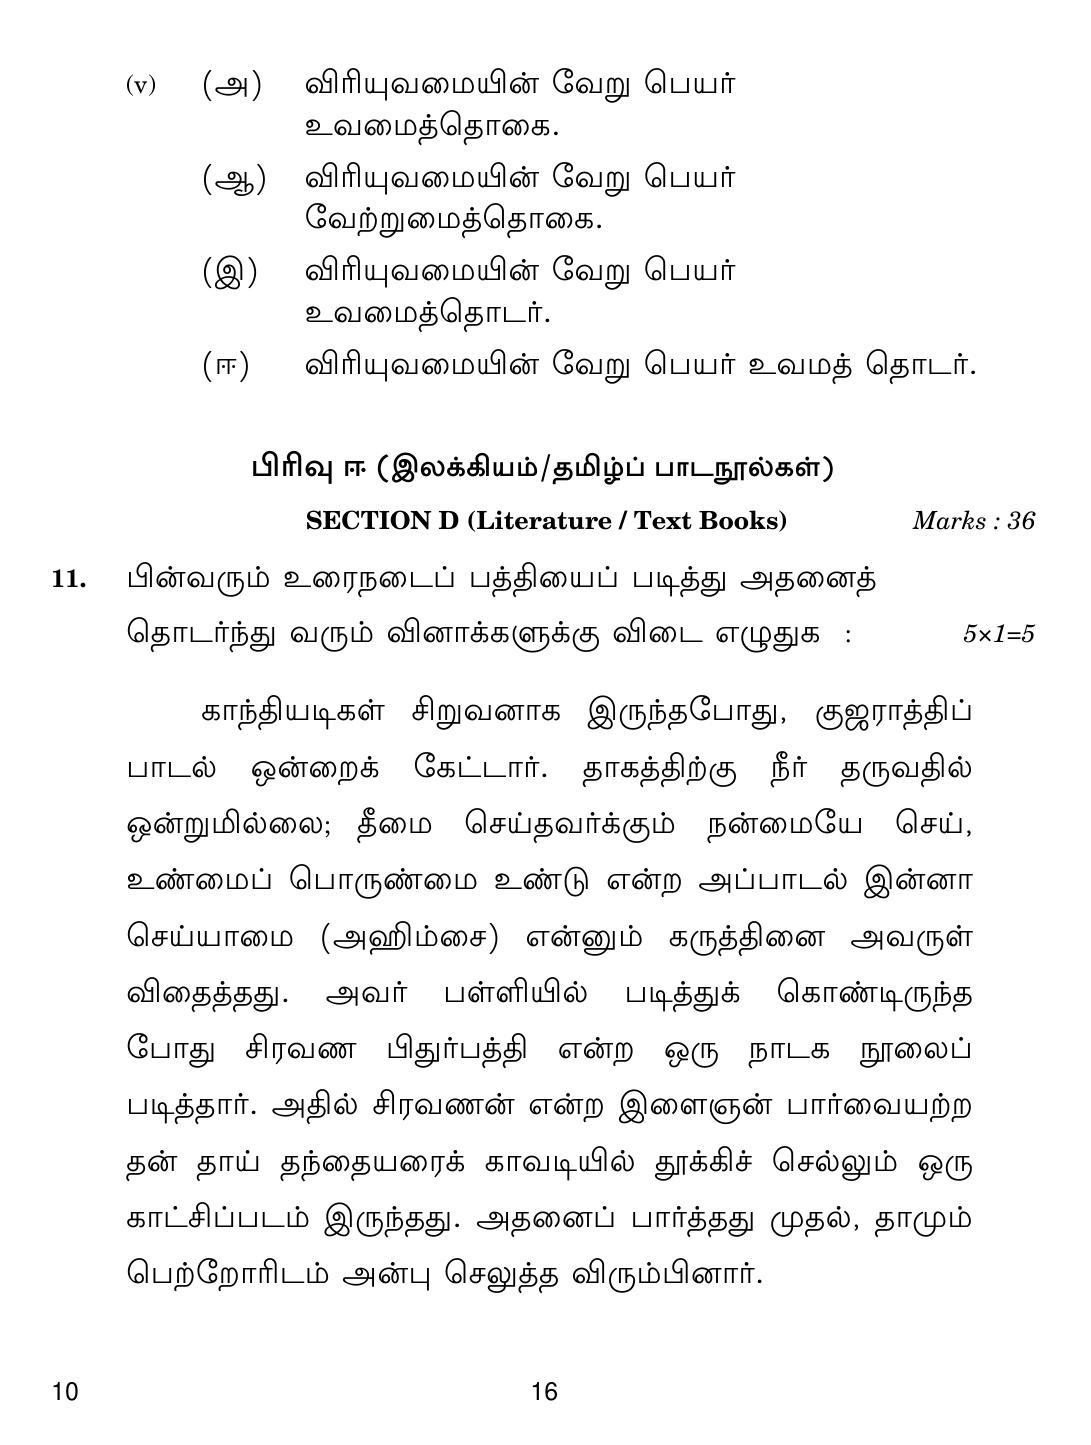 CBSE Class 10 10 Tamil 2019 Question Paper - Page 16